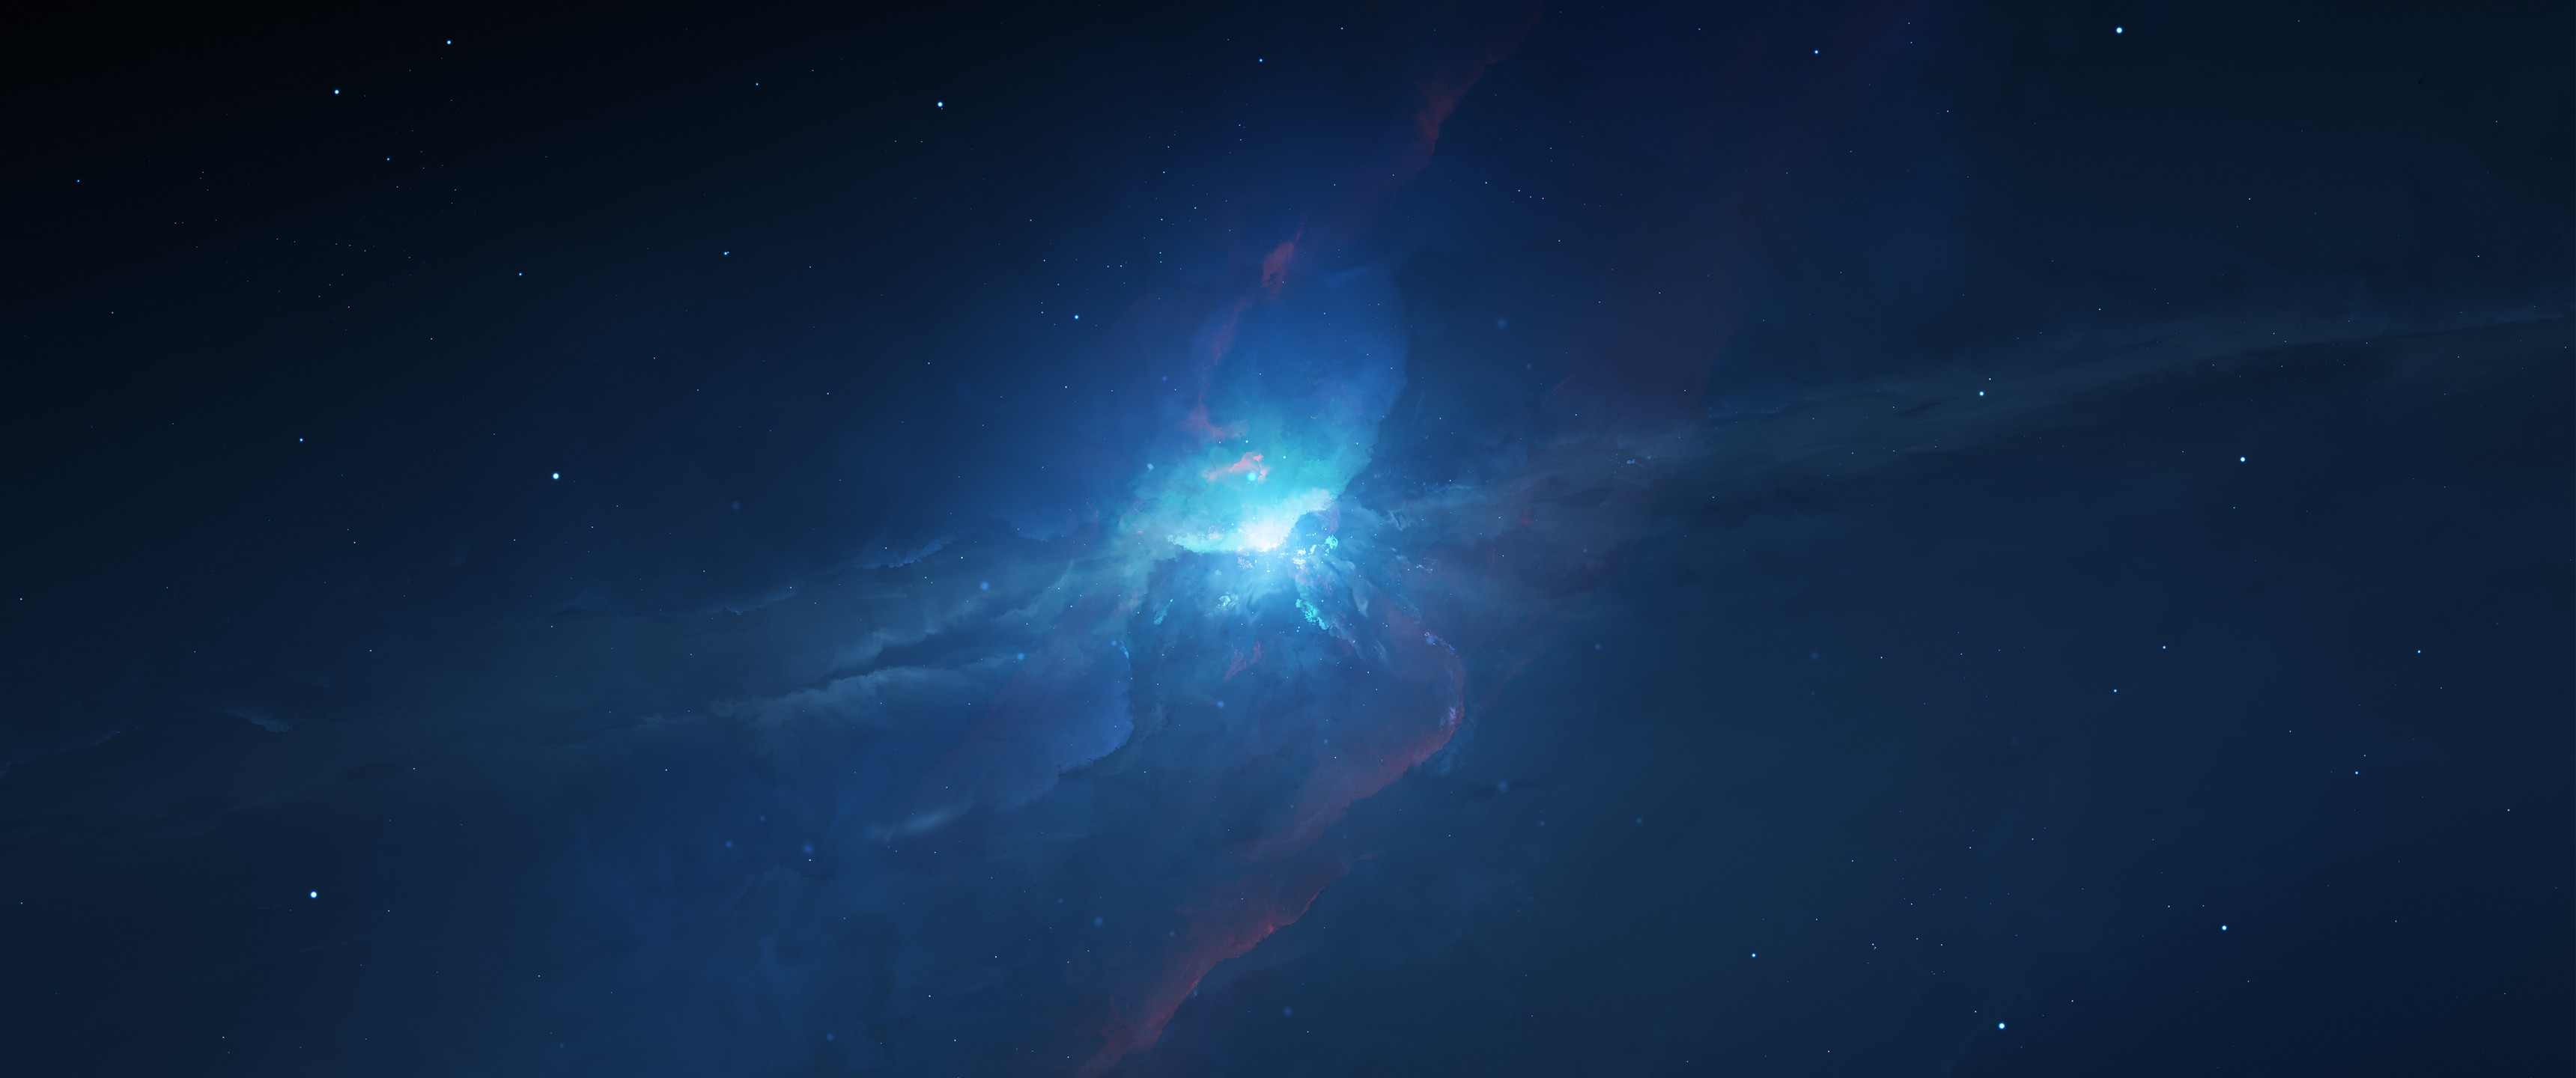 3440x1440 ultrawide, Astrophotography, Space, Blue Wallpaper